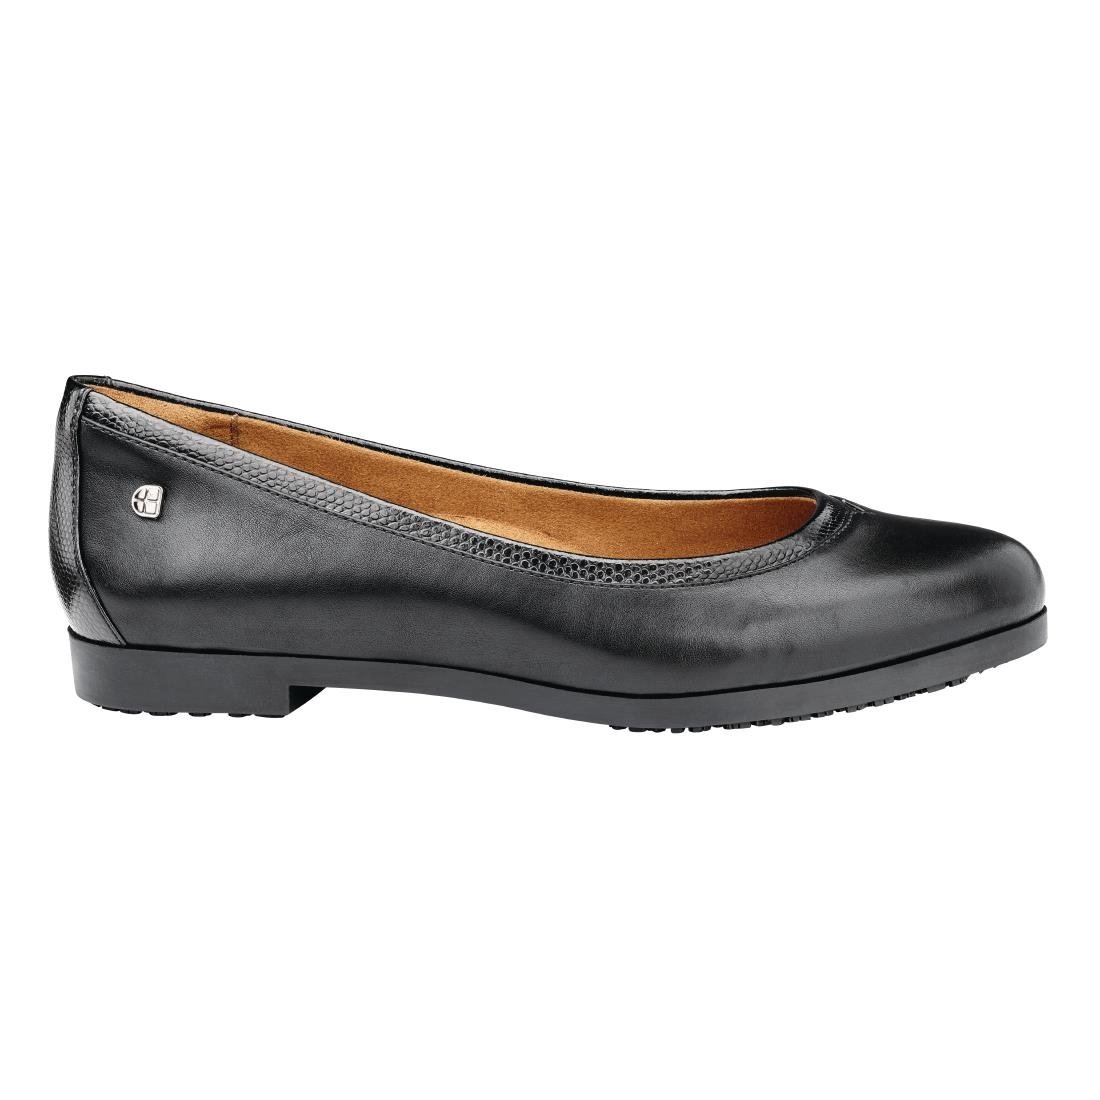 BB594-38 Shoes for Crews Womens Reese Slip On Shoes Black Size 38 JD Catering Equipment Solutions Ltd